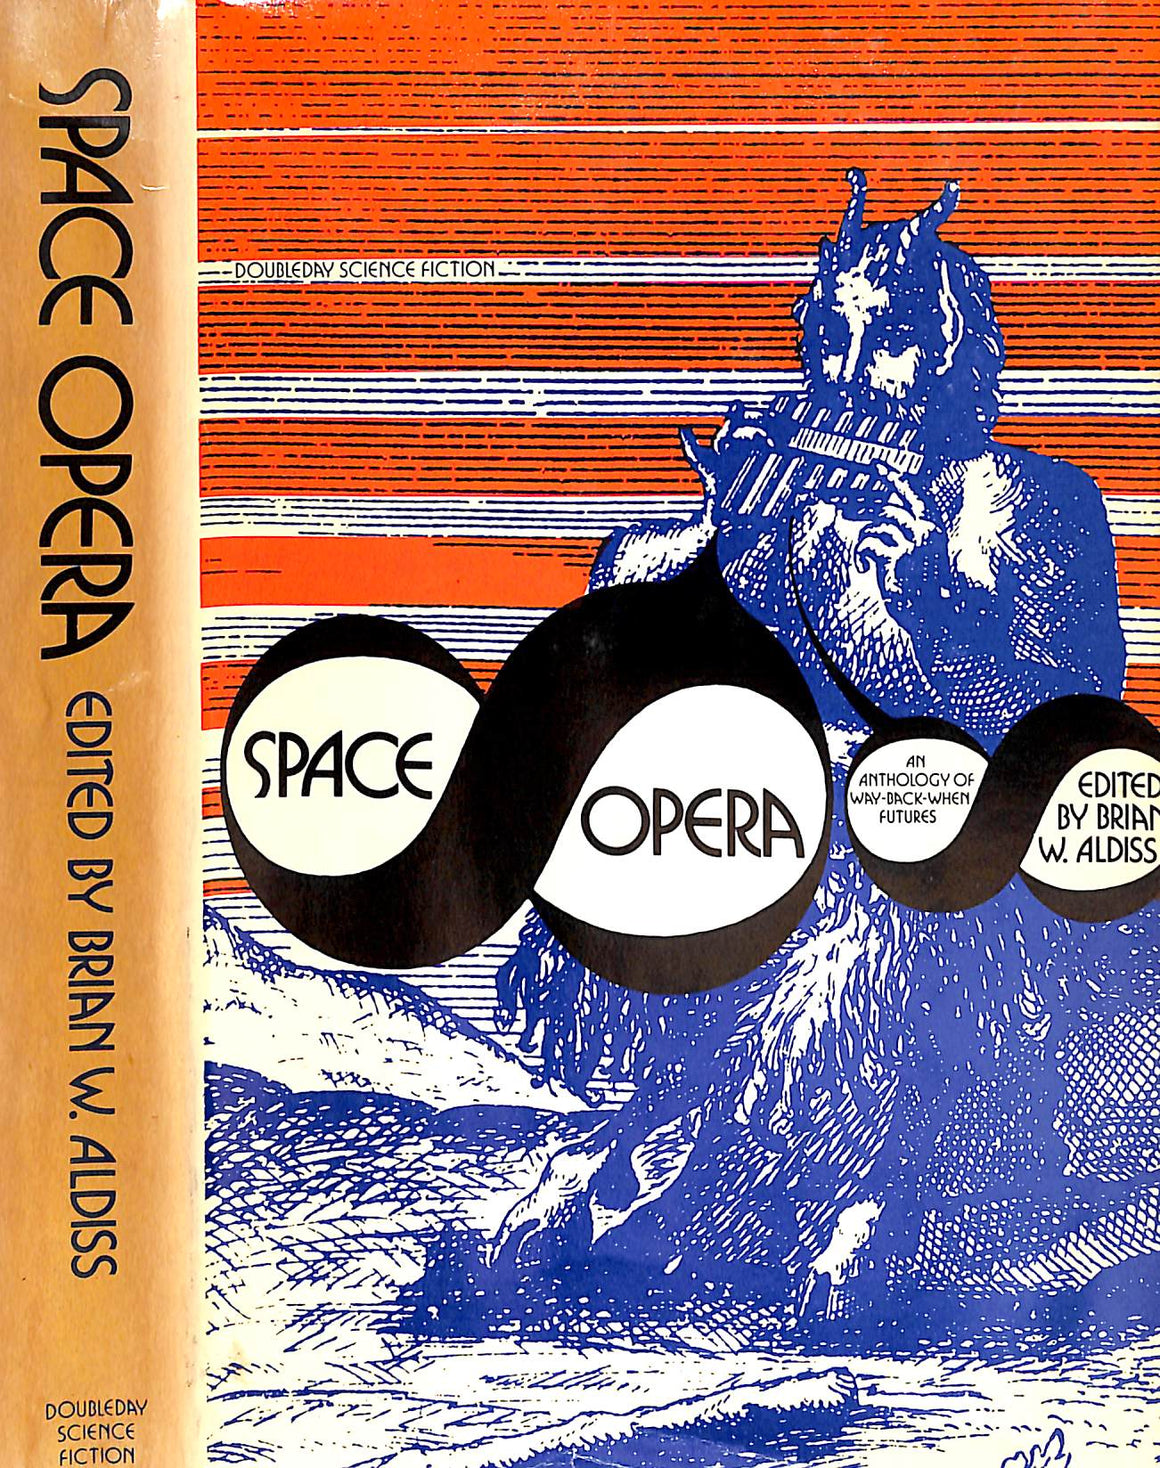 "Space Opera An Anthology Of Way-Back- When Futures" 1974 ALDISS, Brian W. [edited by]